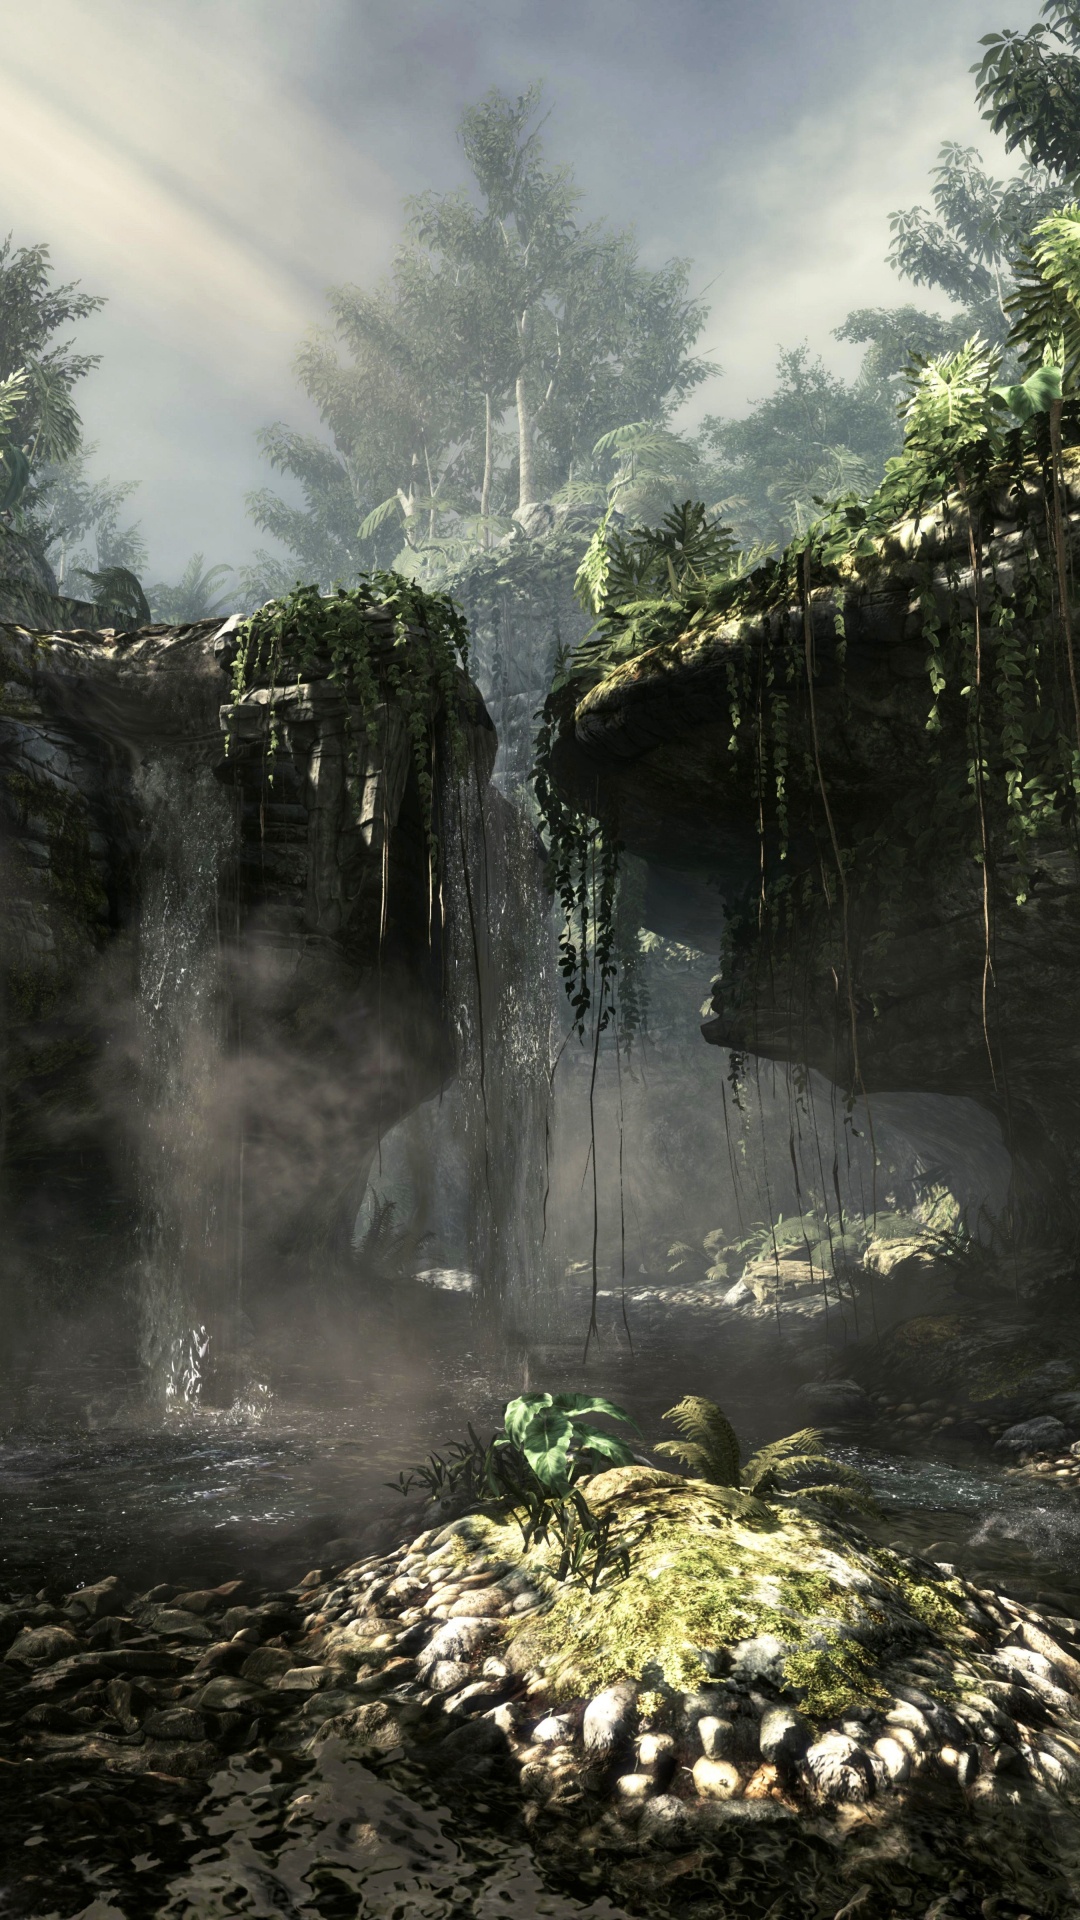 Call of Duty Ghosts, Call of Duty Black Ops Ii, Activision, Infinity Ward, Vegetation. Wallpaper in 1080x1920 Resolution